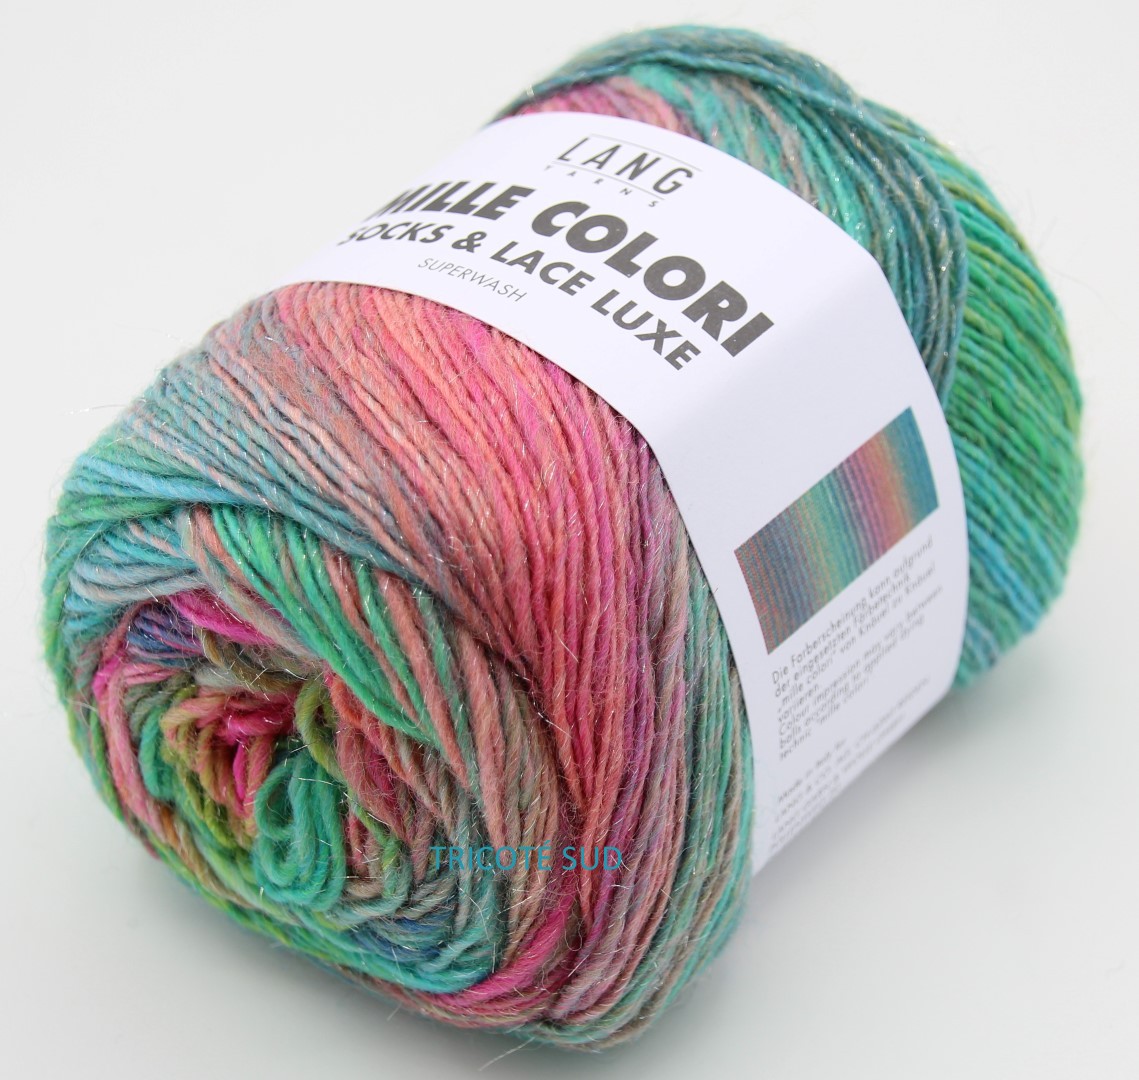 MILLE COLORI SOCKS AND LACE LUXE LANG YARNS COLORIS 200 (1) (Large)